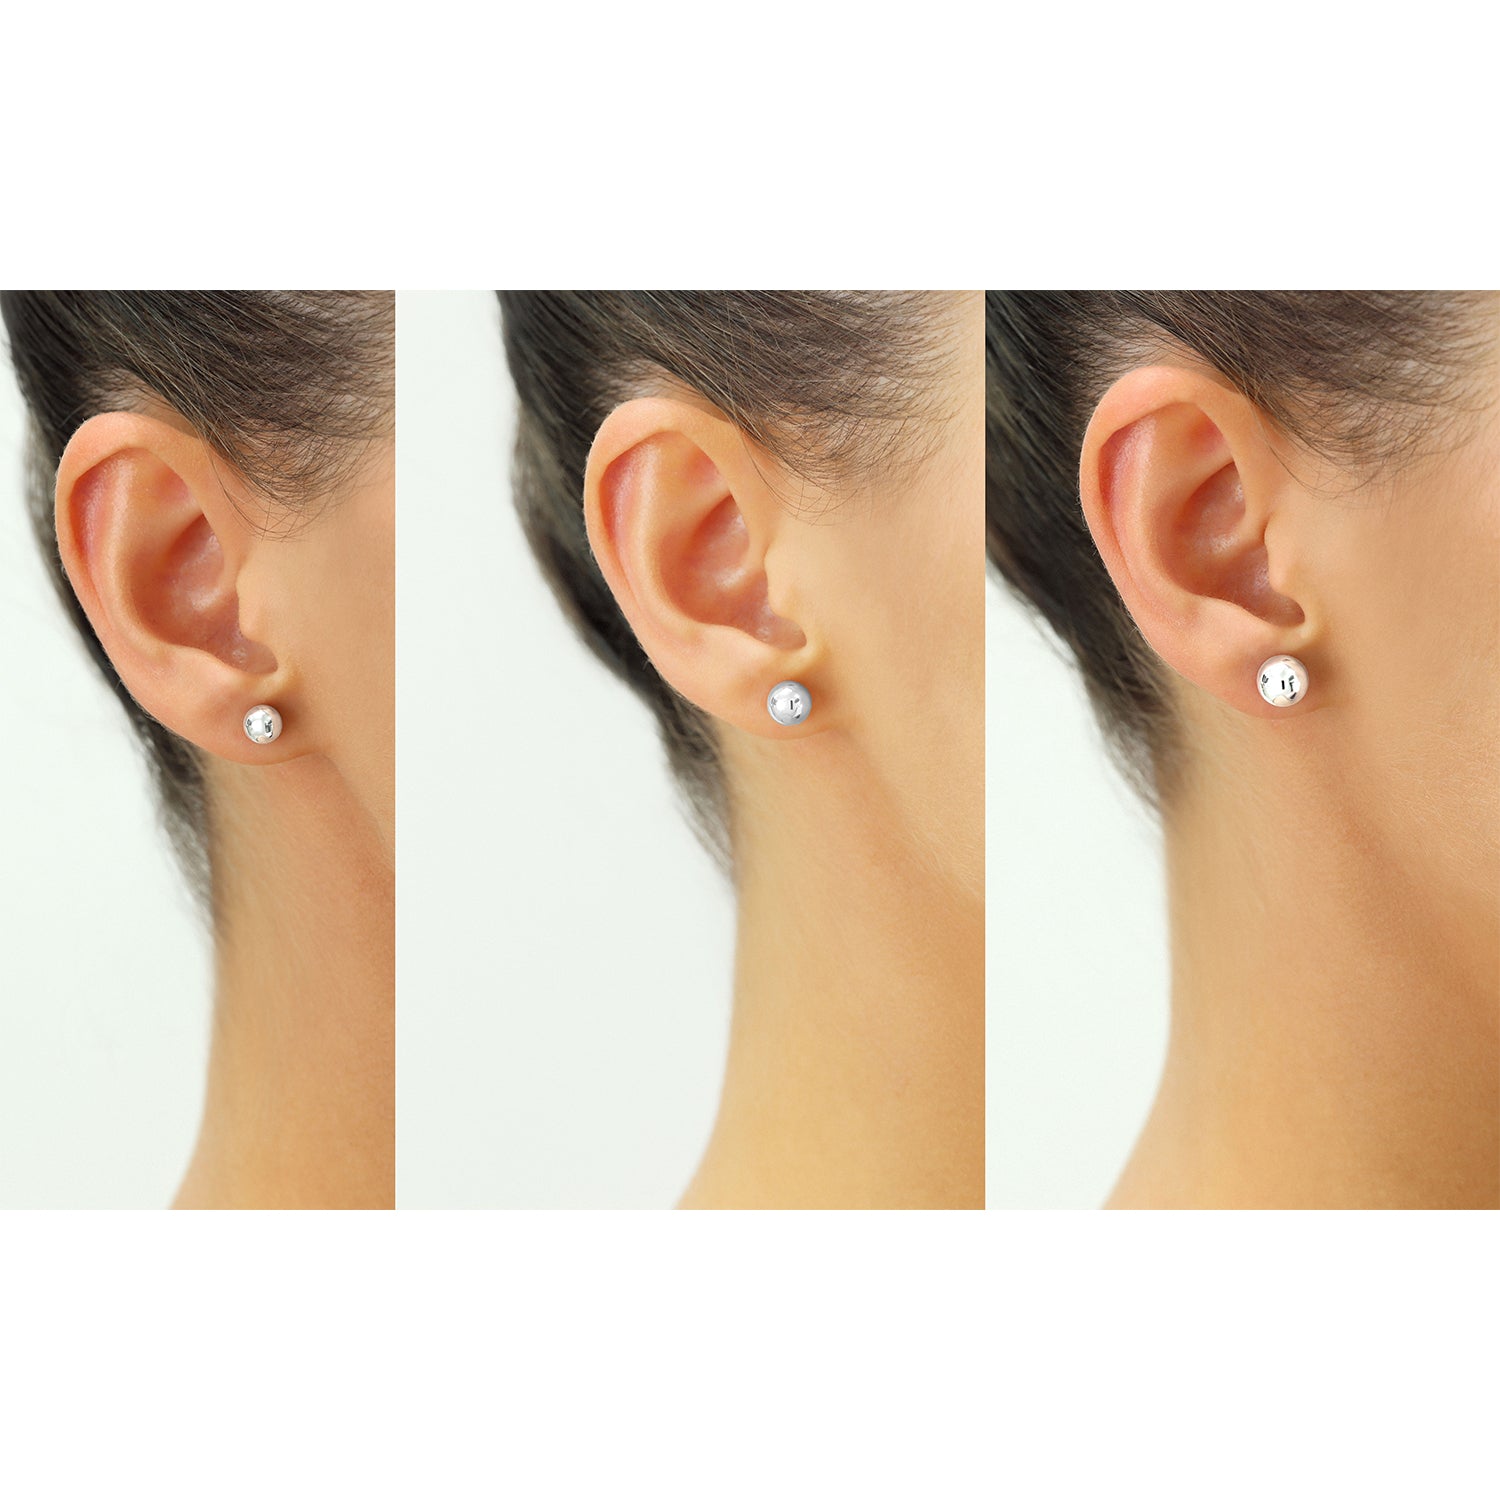 Bundle Set of 3! 14K White Gold Ball Stud Earrings with Screw Backings, unisex 6mm 7mm 8mm